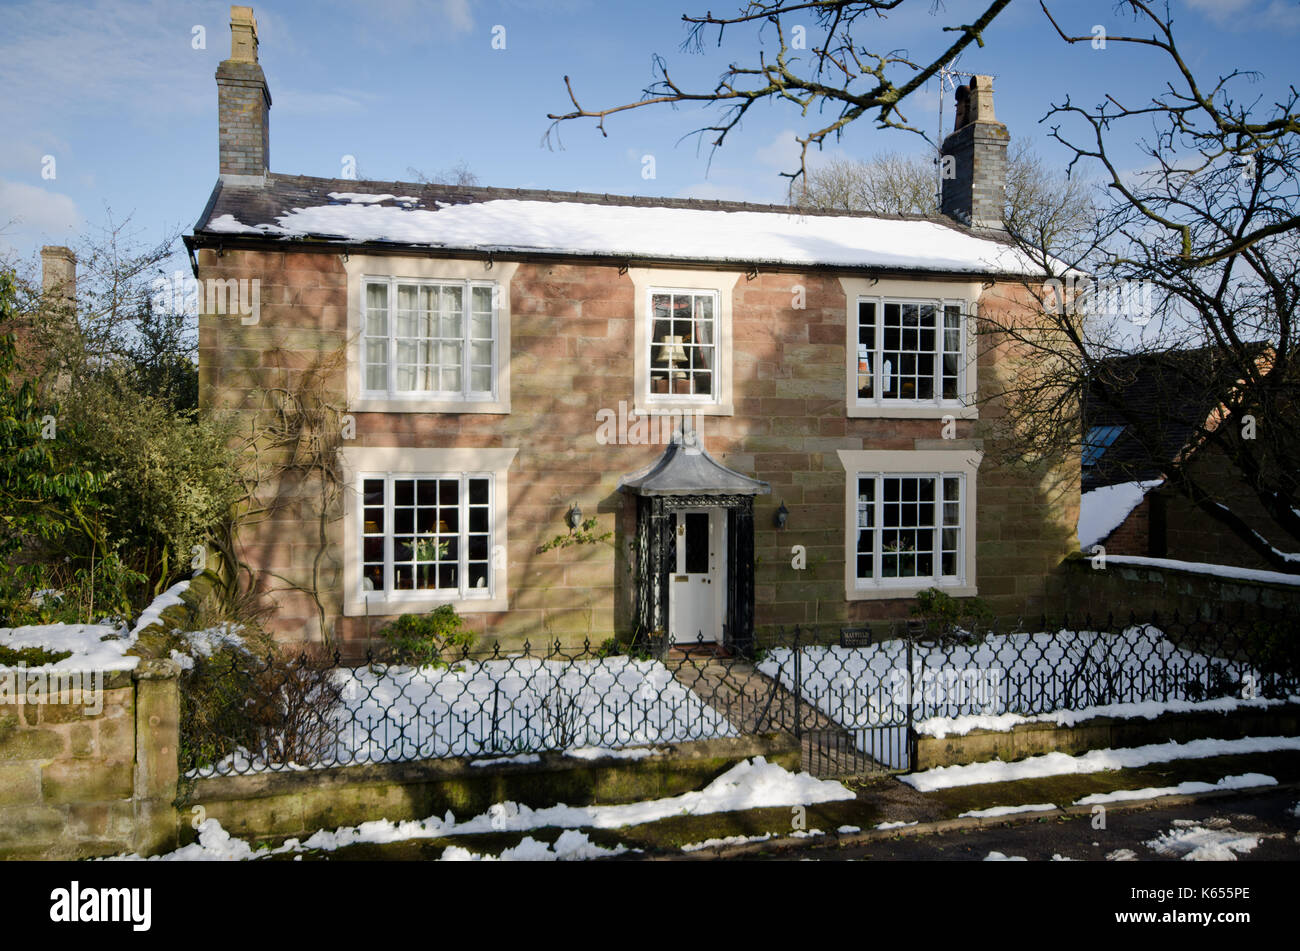 Period Peak District house in winter with snow Stock Photo